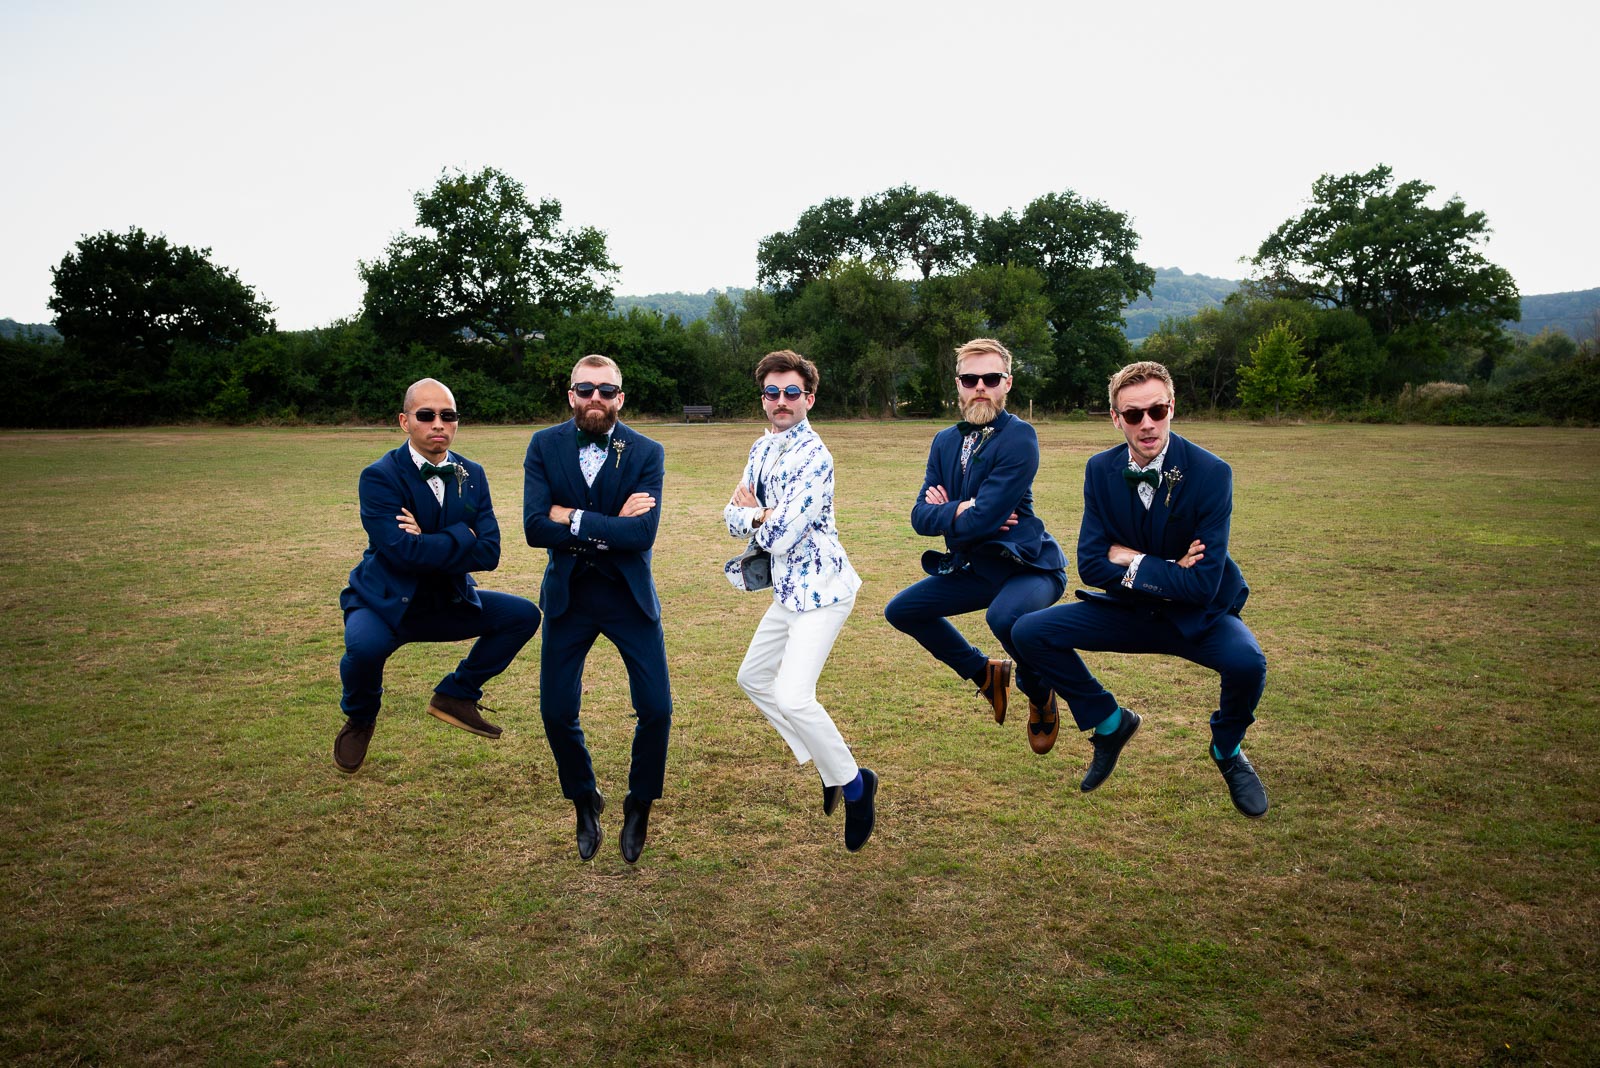 Edward and his Groomsmen pull off an impressive jumping pose during the Wedding Reception at Beechwood Hall & Rural Park. 